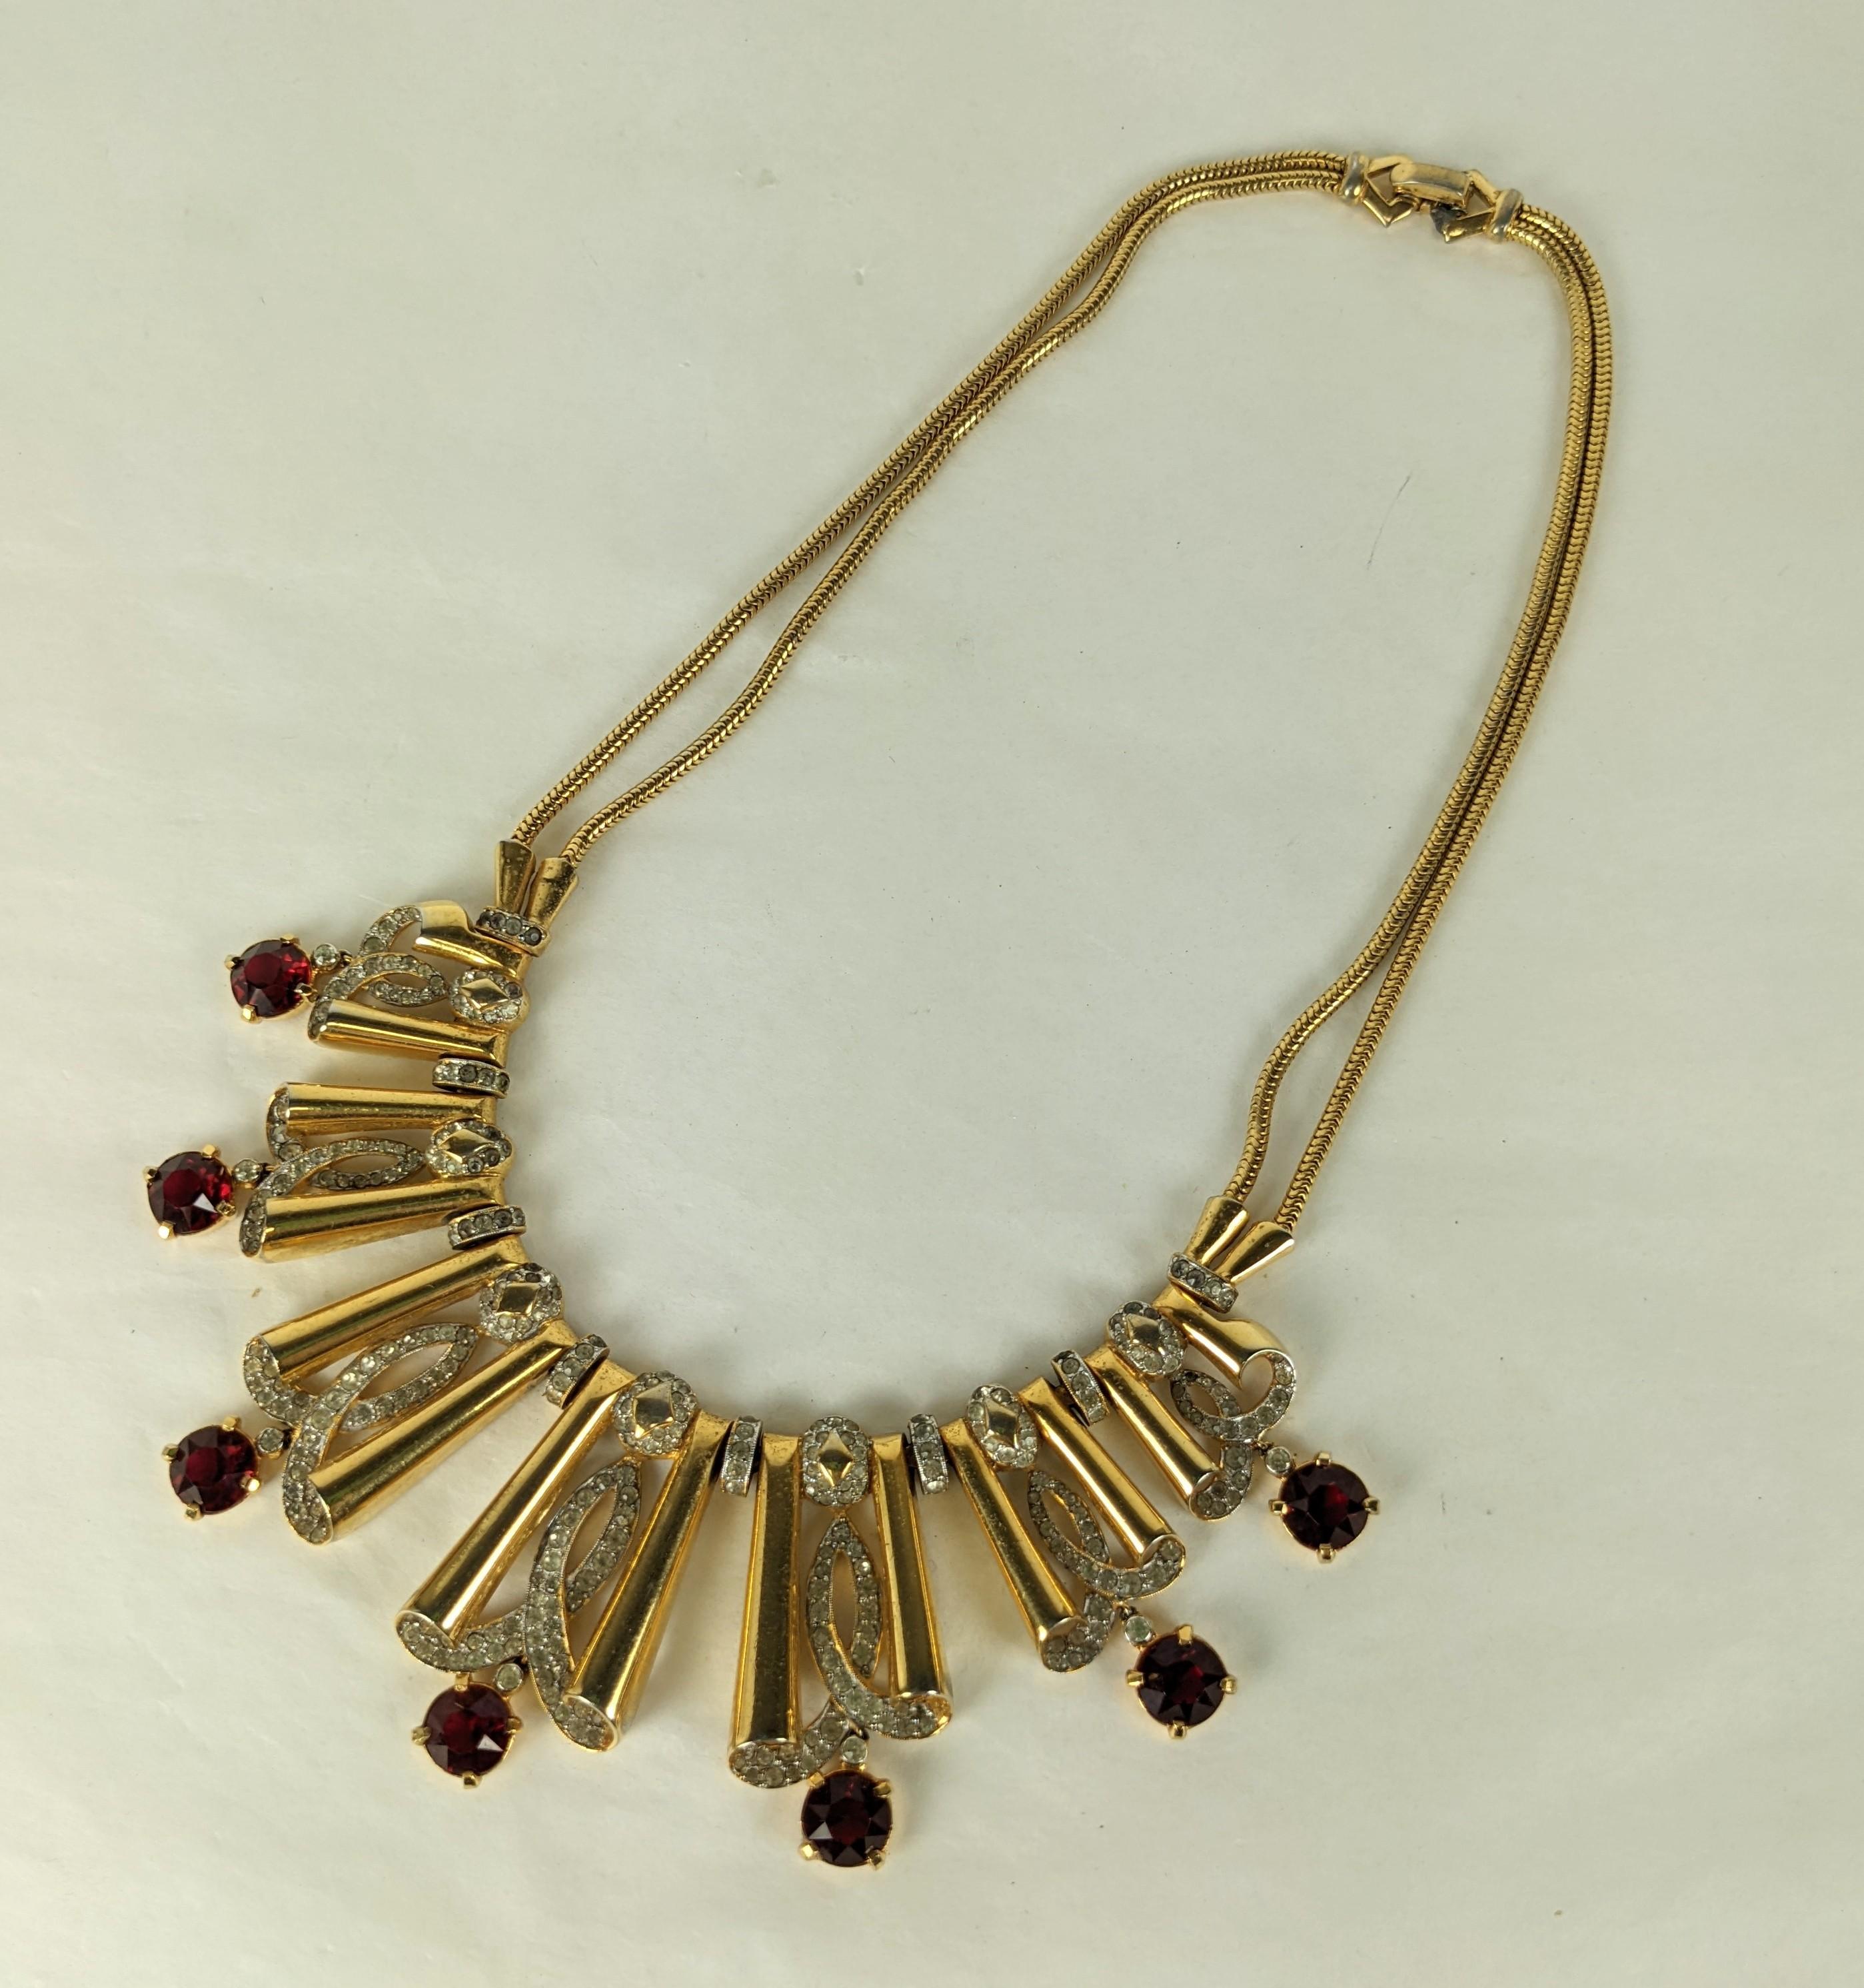 Important Mazer wide Retro link necklace of rhodium plate base metal and yellow gold plate. Composed of overlapping linked retro half bows with crystal pave rhinestone accents and large focal faux rubies and articulated drops. Woven double fox chain